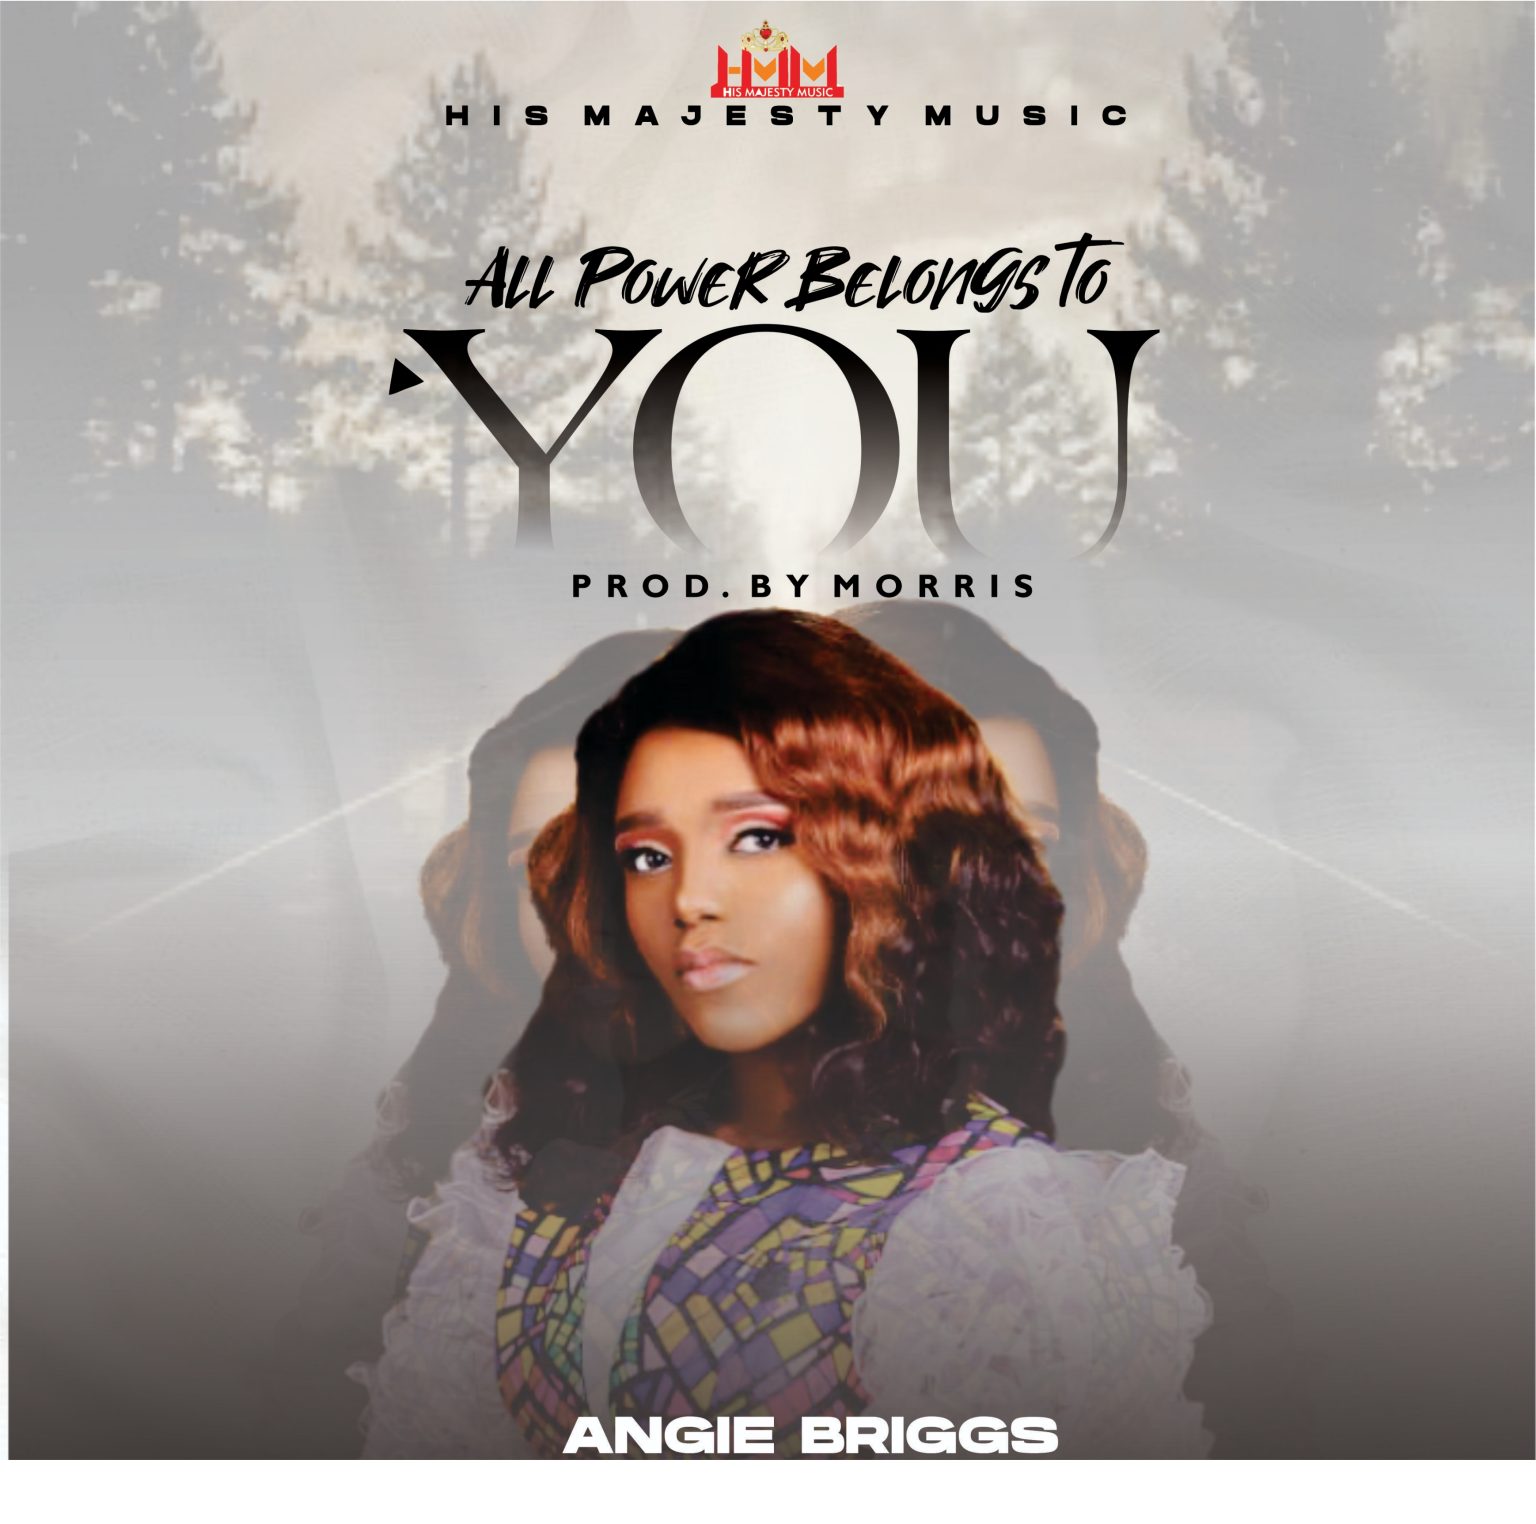 Angie Briggs – All Power Belongs To You